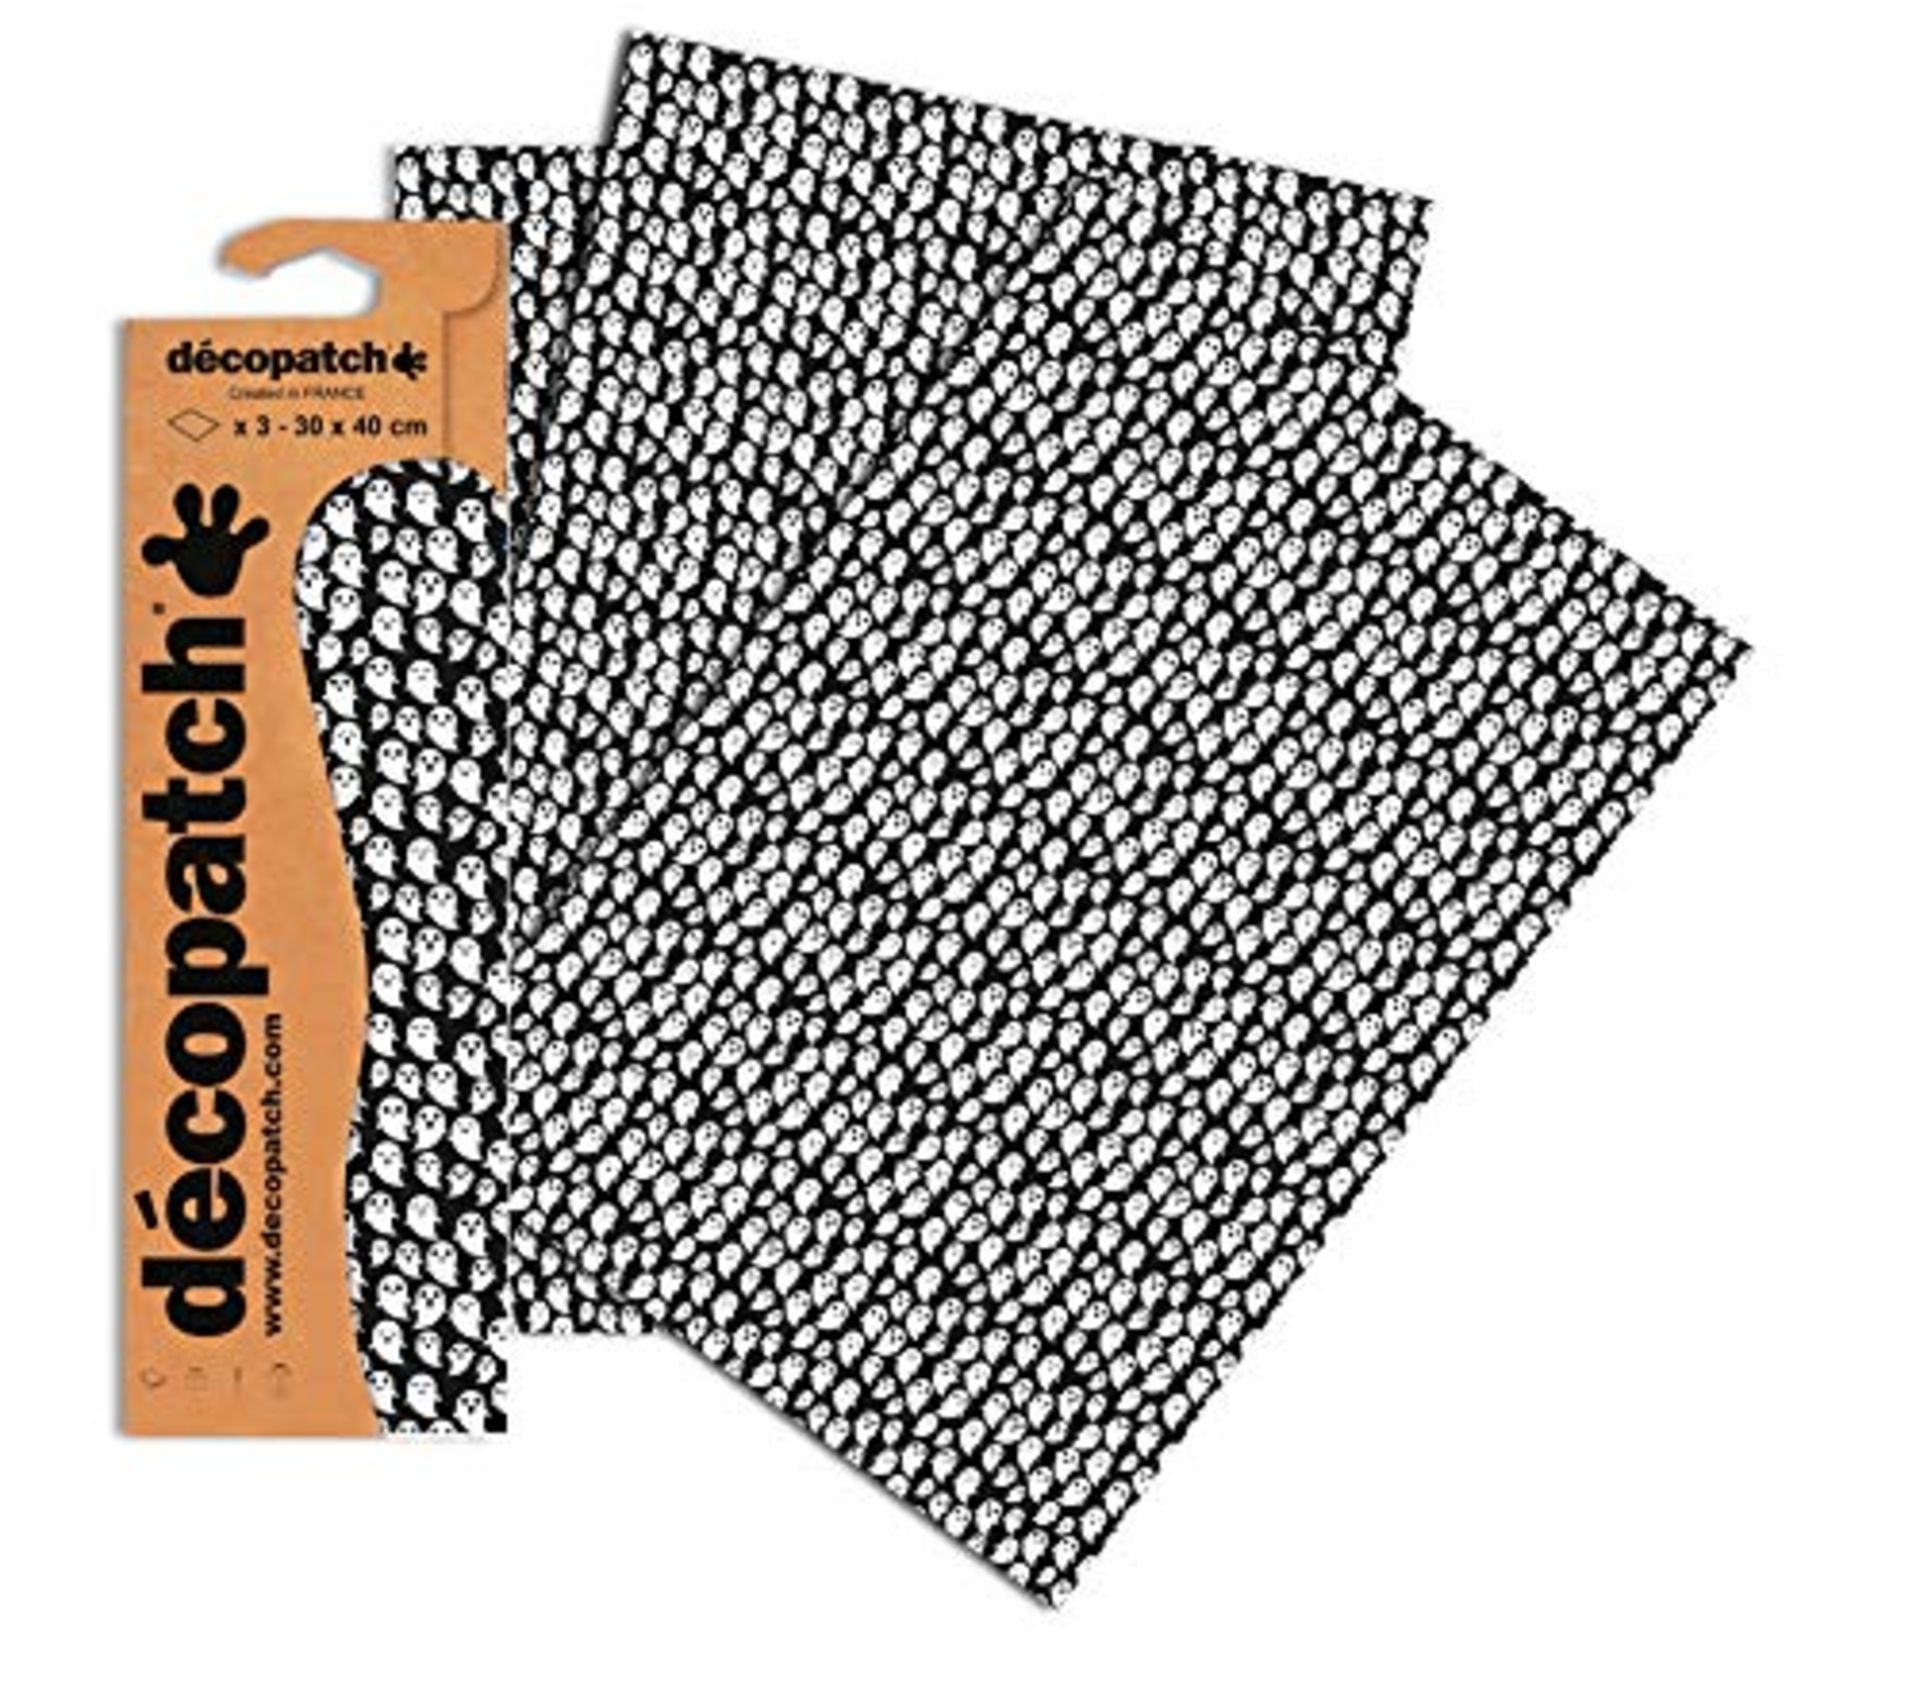 Décopatch Halloween Ghosts Paper, 30x40 cm (Pack of 3 sheets)